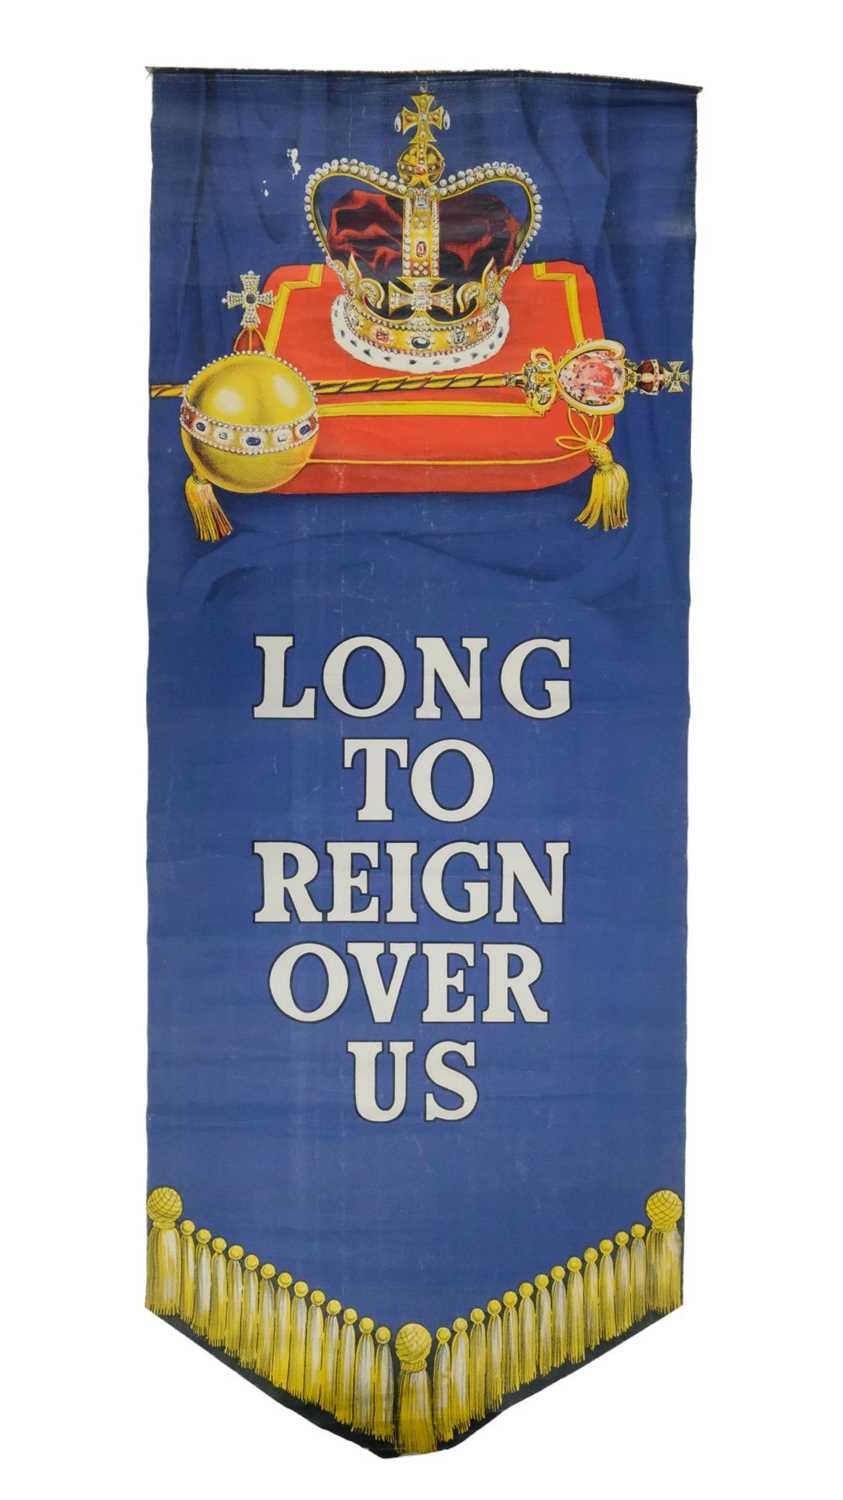 A QEII 1953 Coronation royal commemorative wall hanging "Long to Reign Over Us", 35.5 x 89 cm